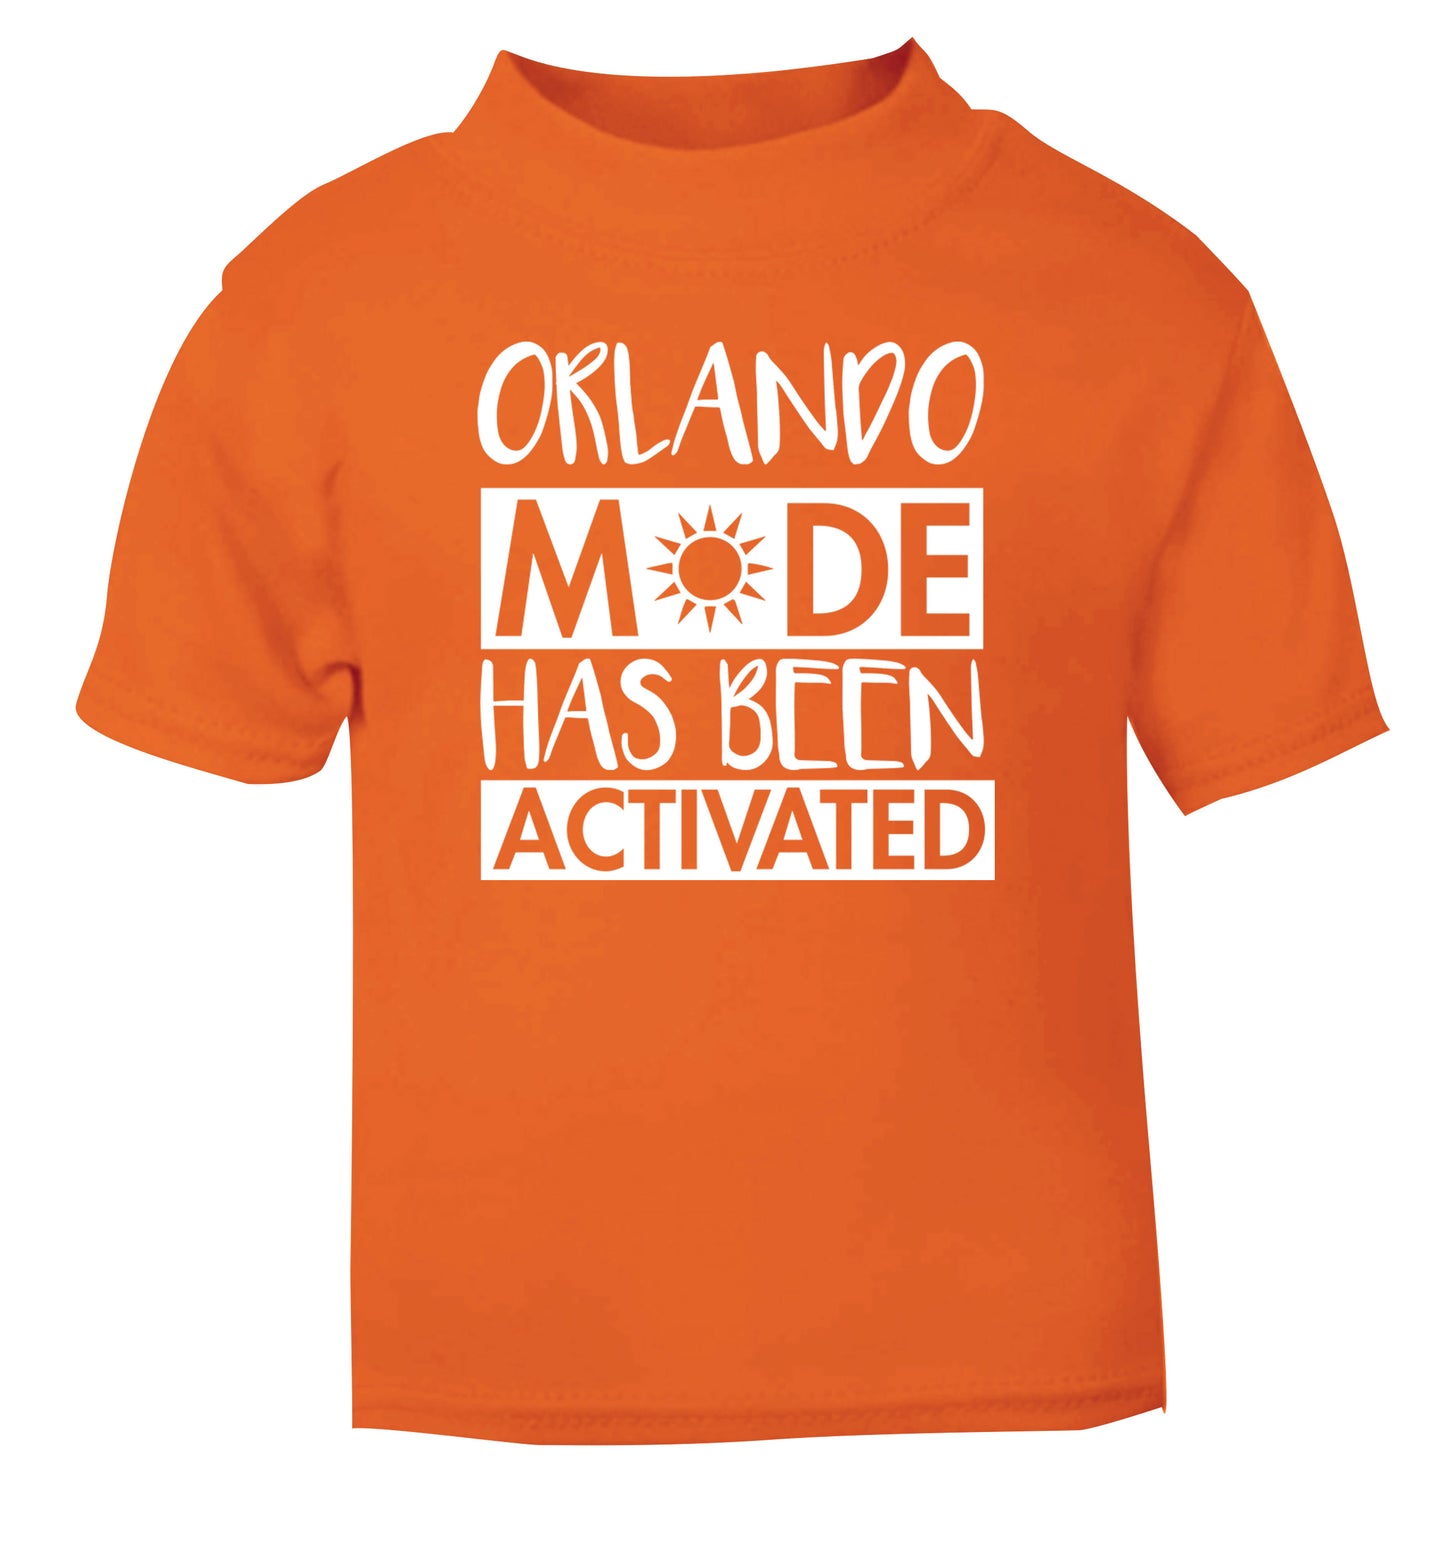 Orlando mode has been activated orange Baby Toddler Tshirt 2 Years